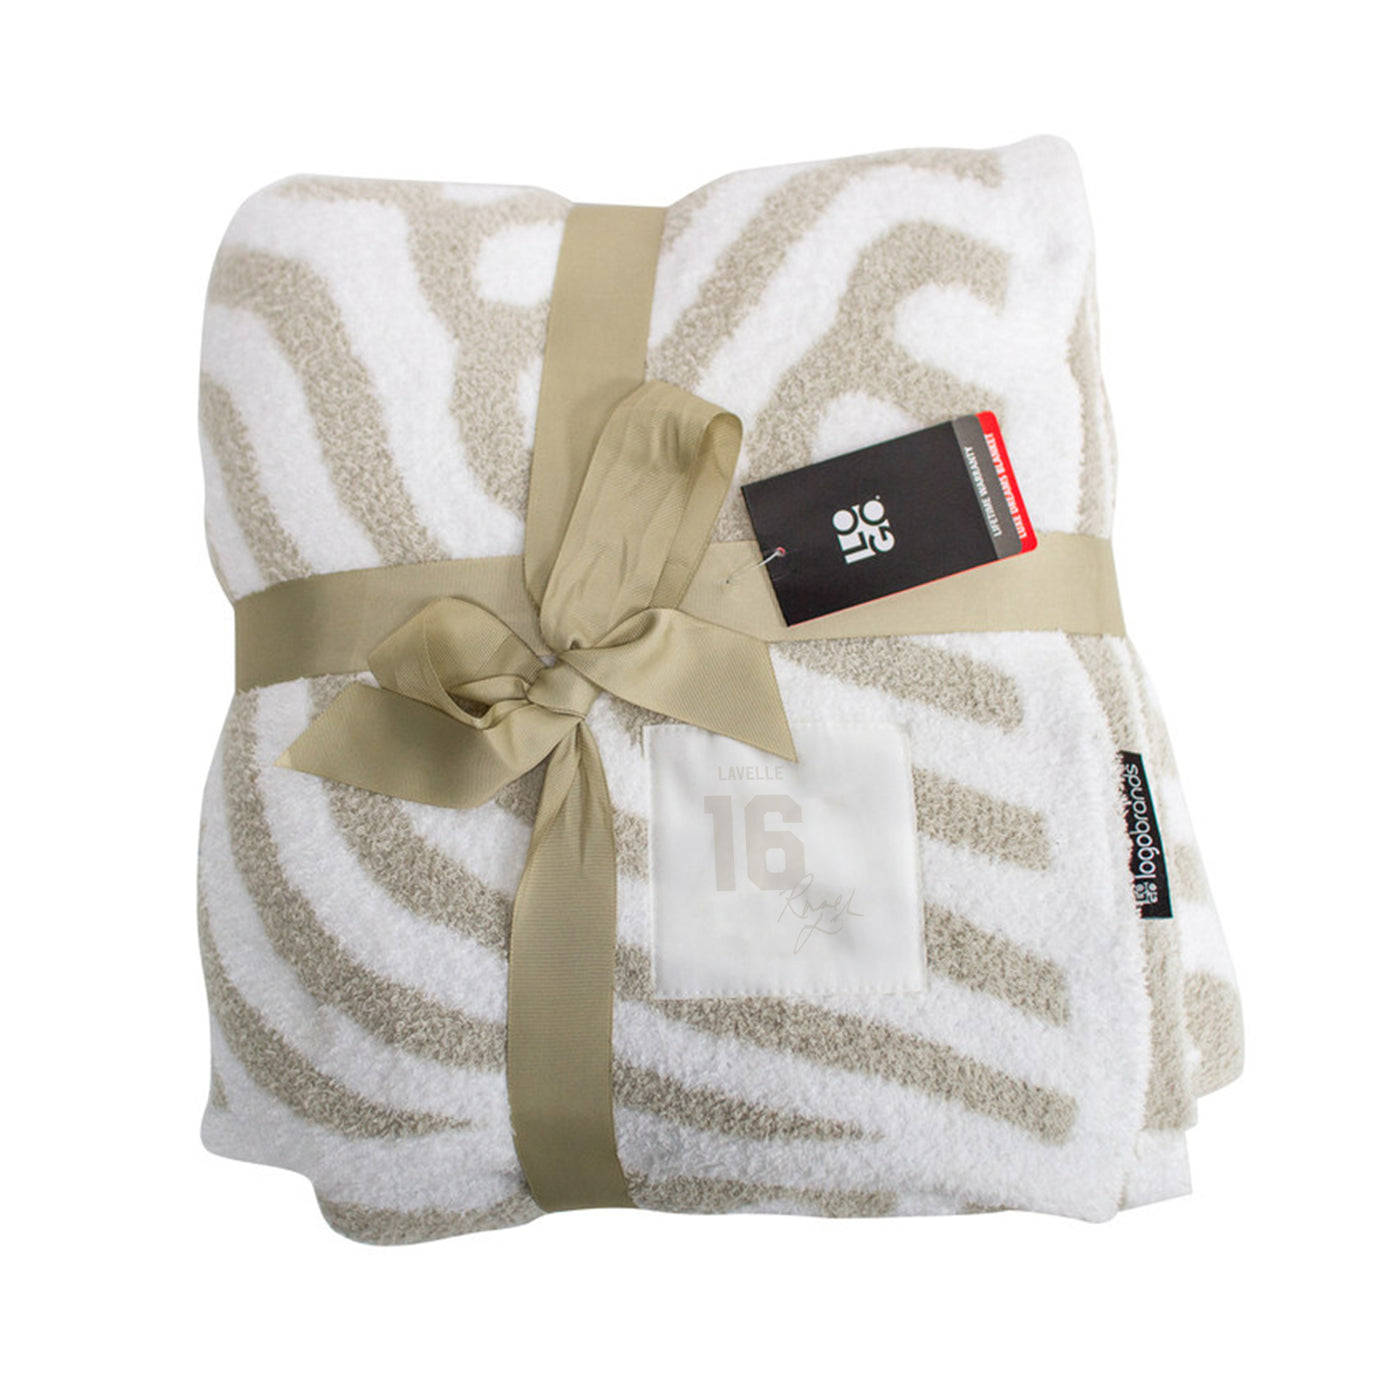 US Womens National Team Rose Lavelle Luxe Dreams Throw